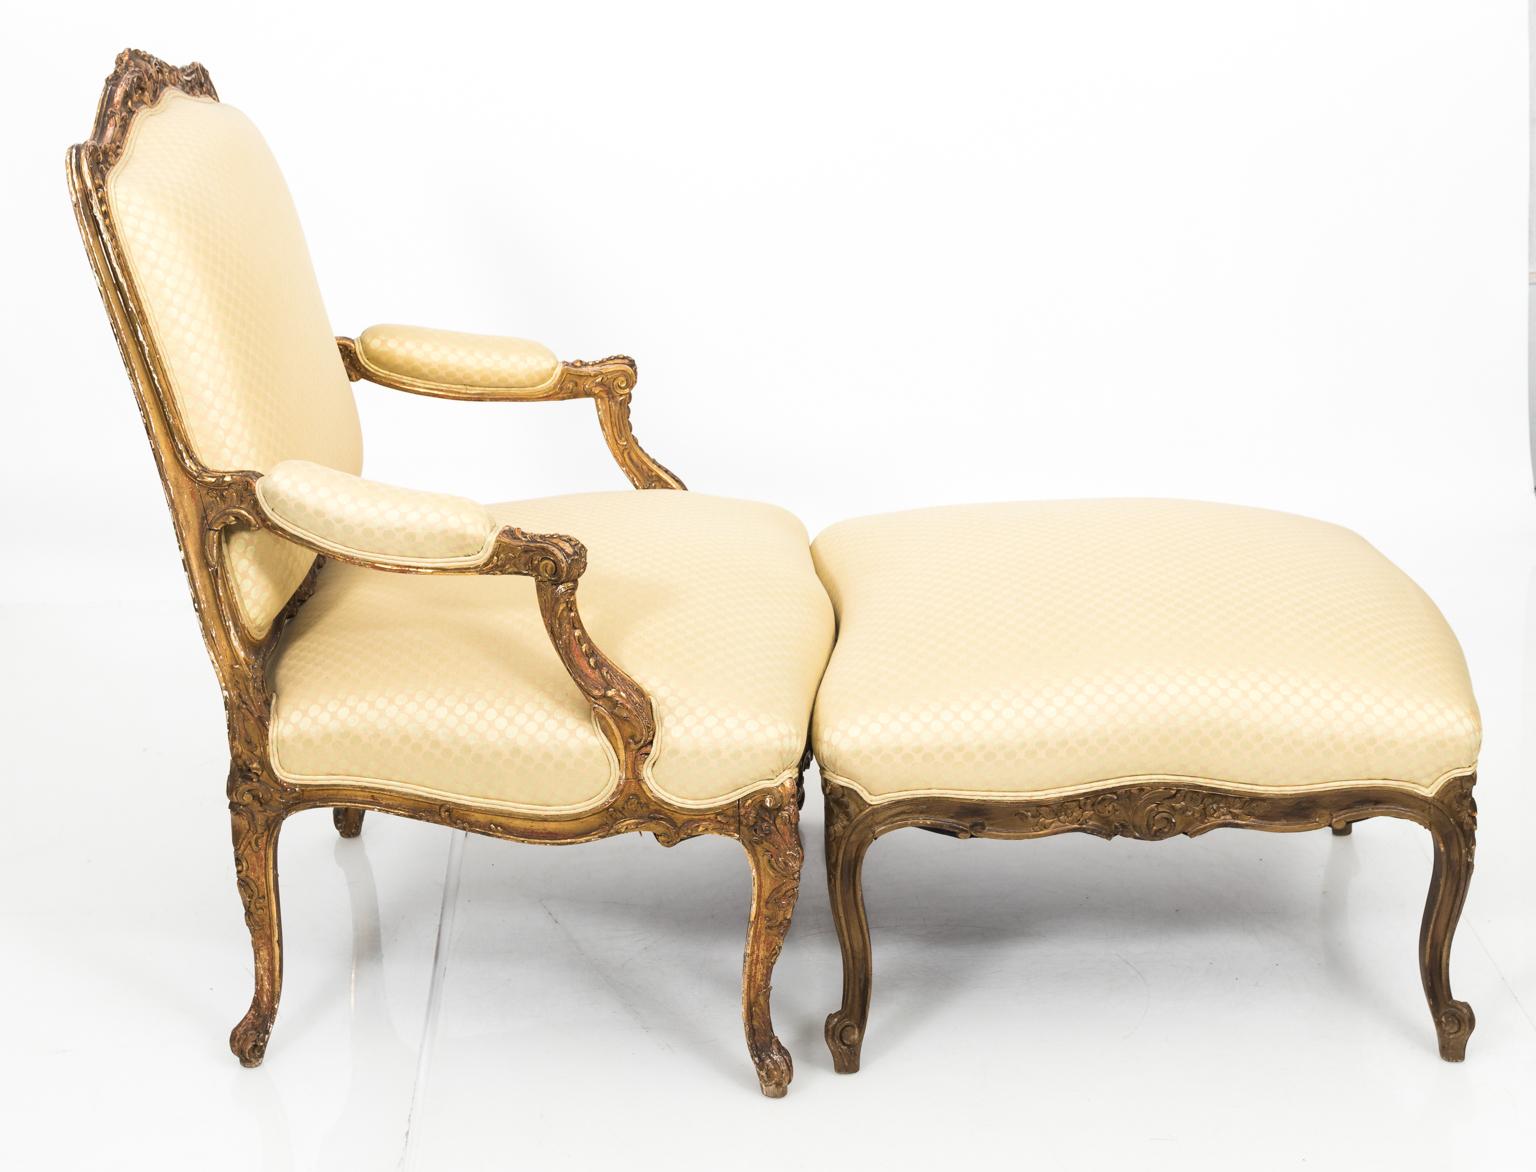 19th Century Giltwood Chaise Lounge Chair For Sale 6